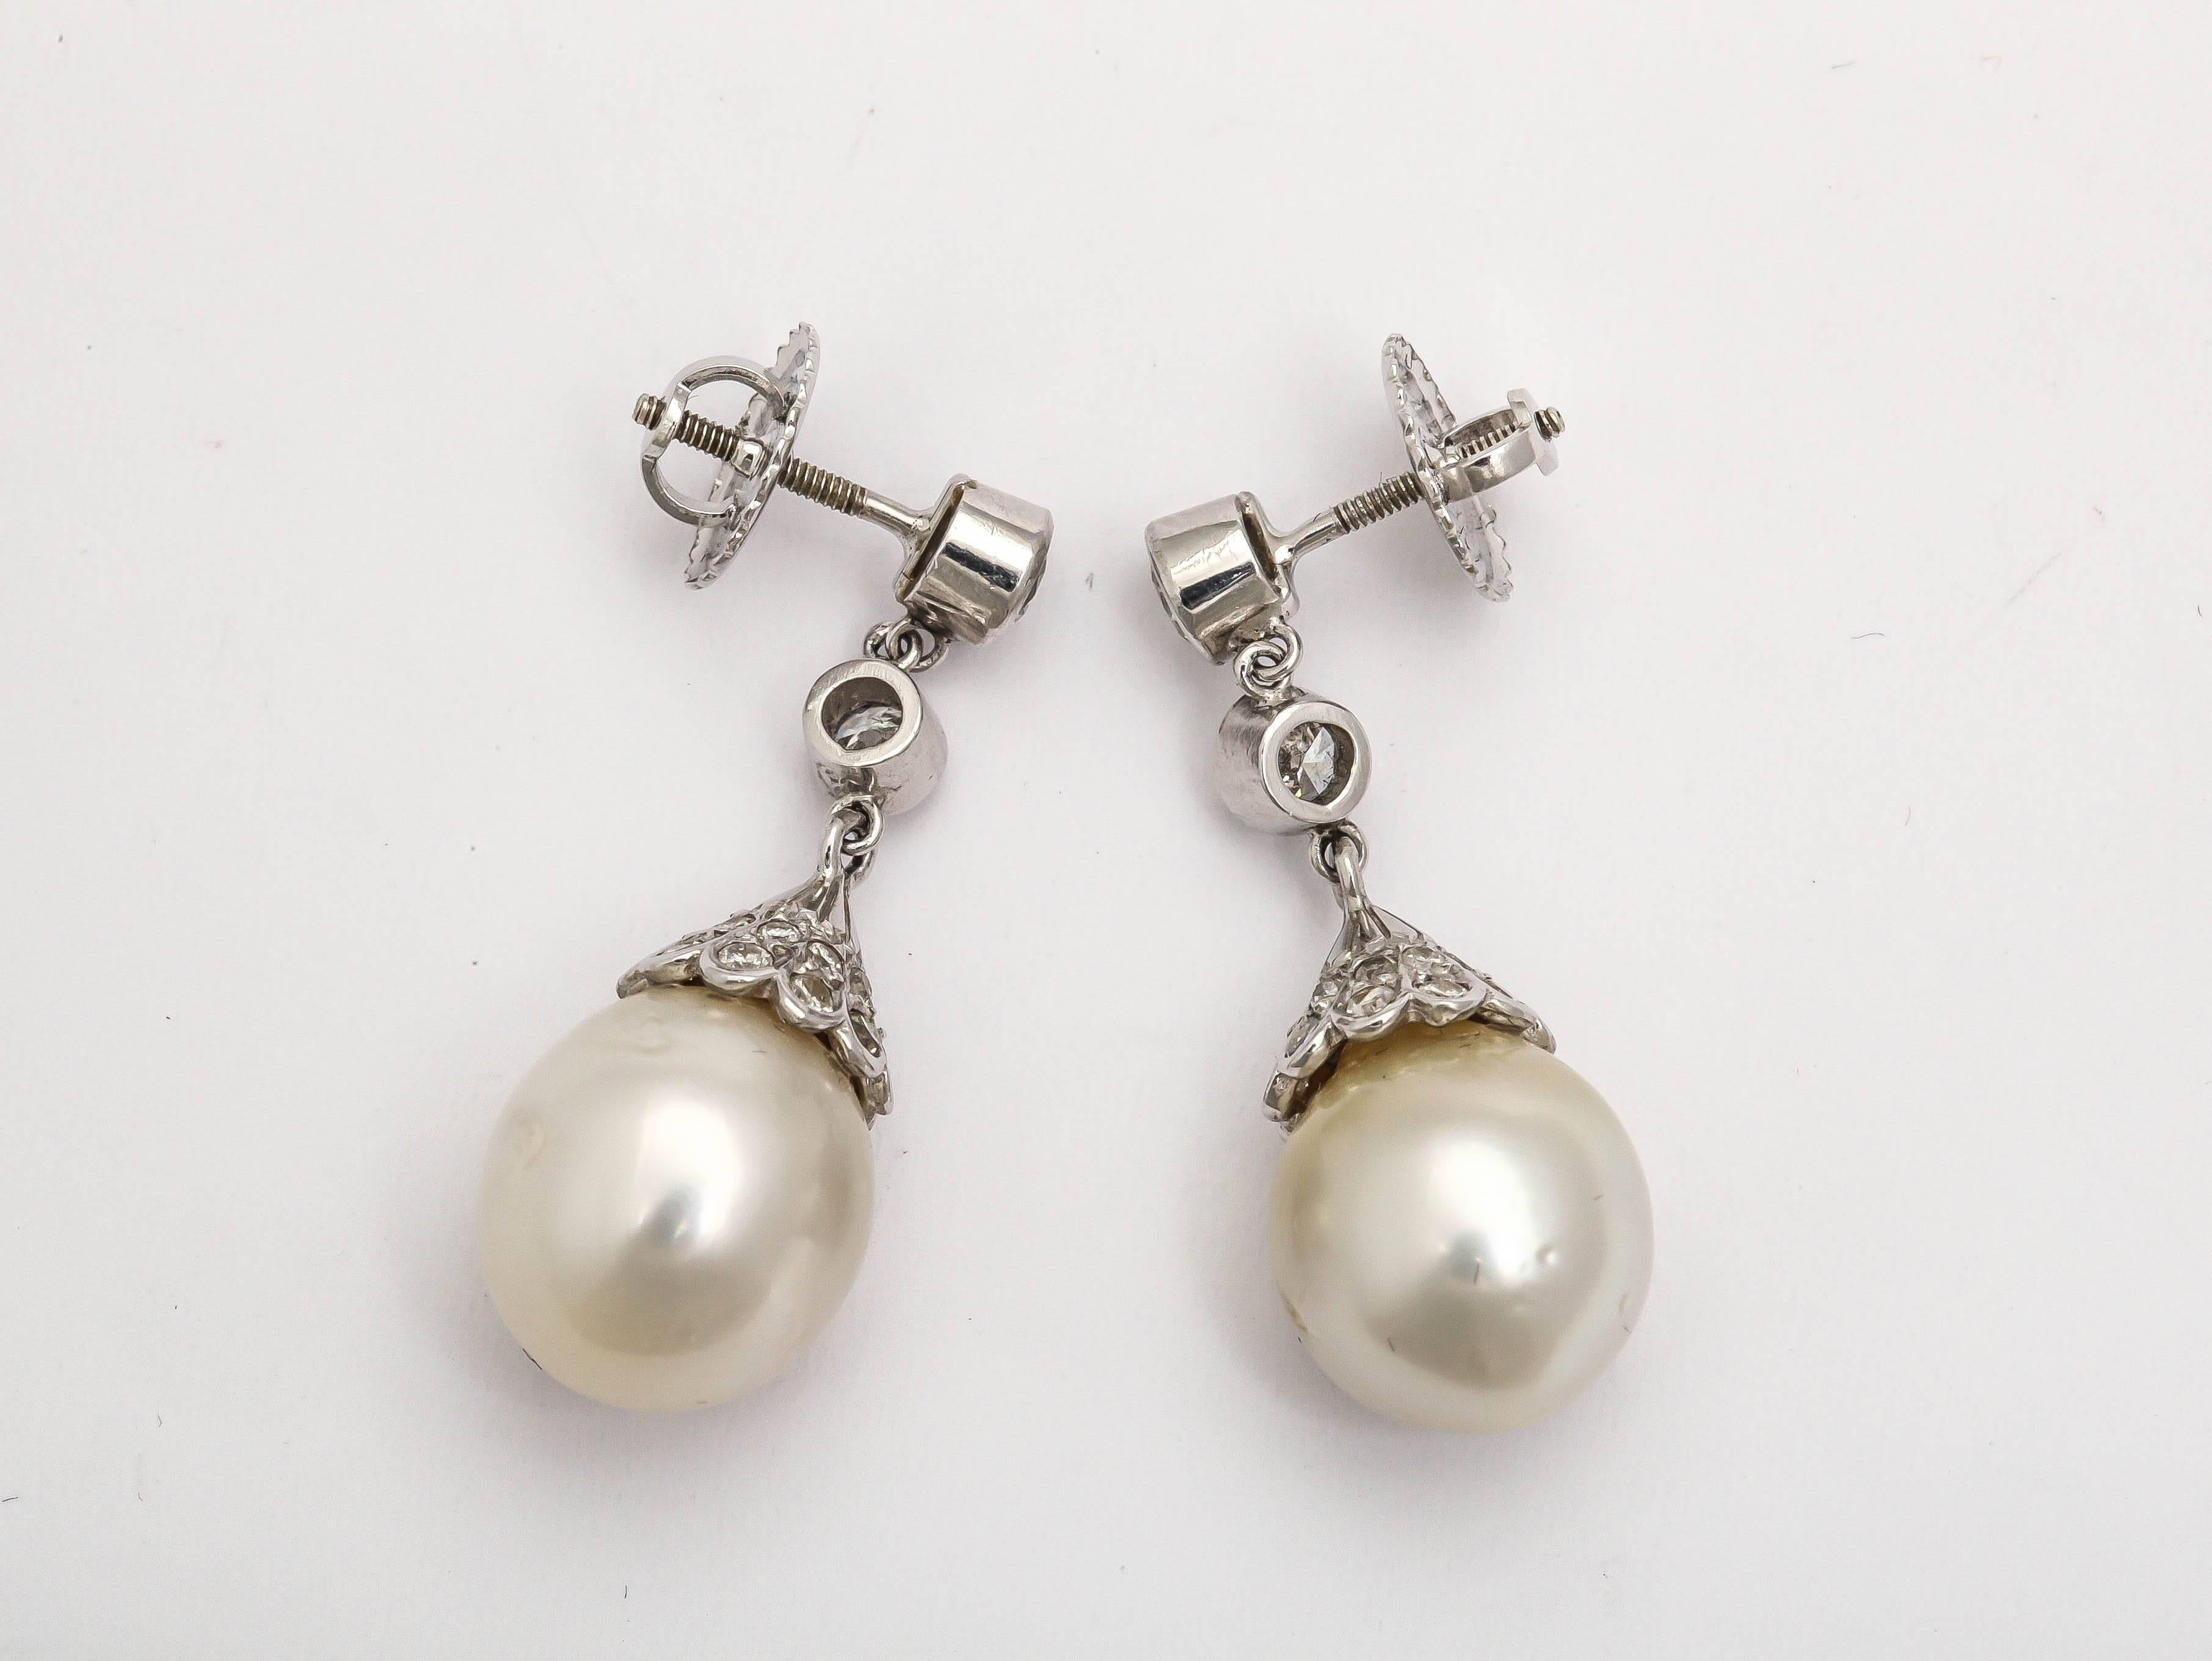 Ultra rich Bulbous South Sea Pear Diamond Capped Drops suspended from Bezel set Diamond Caps.  Set in Platinum. Inspired by Vermeer Pearl Earrings.
So classic.